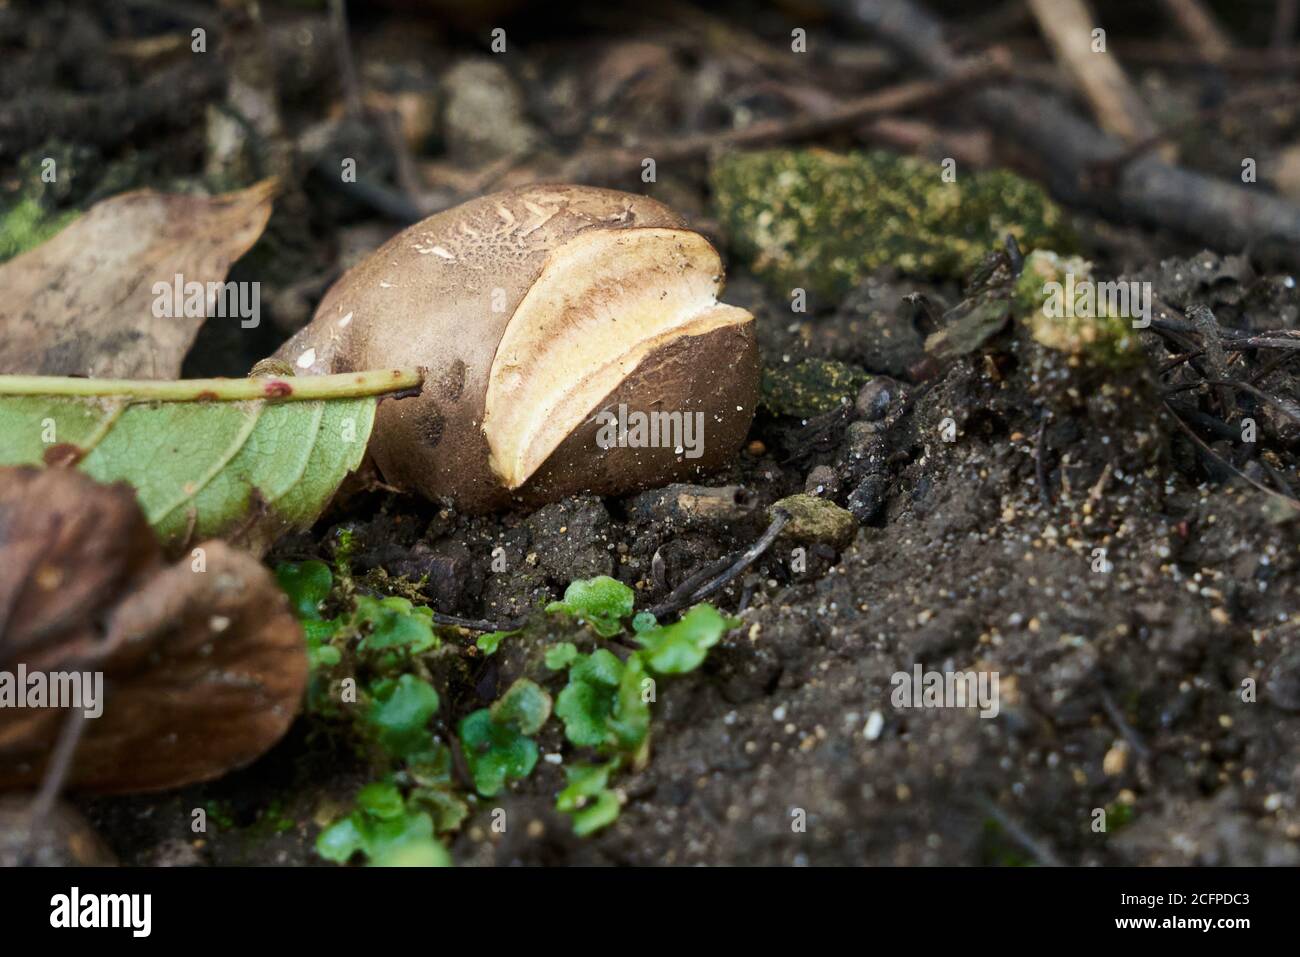 Small young Dyeball dye ball fungus fungi Pisolithus arhizus growing on soil with cracks forming Stock Photo